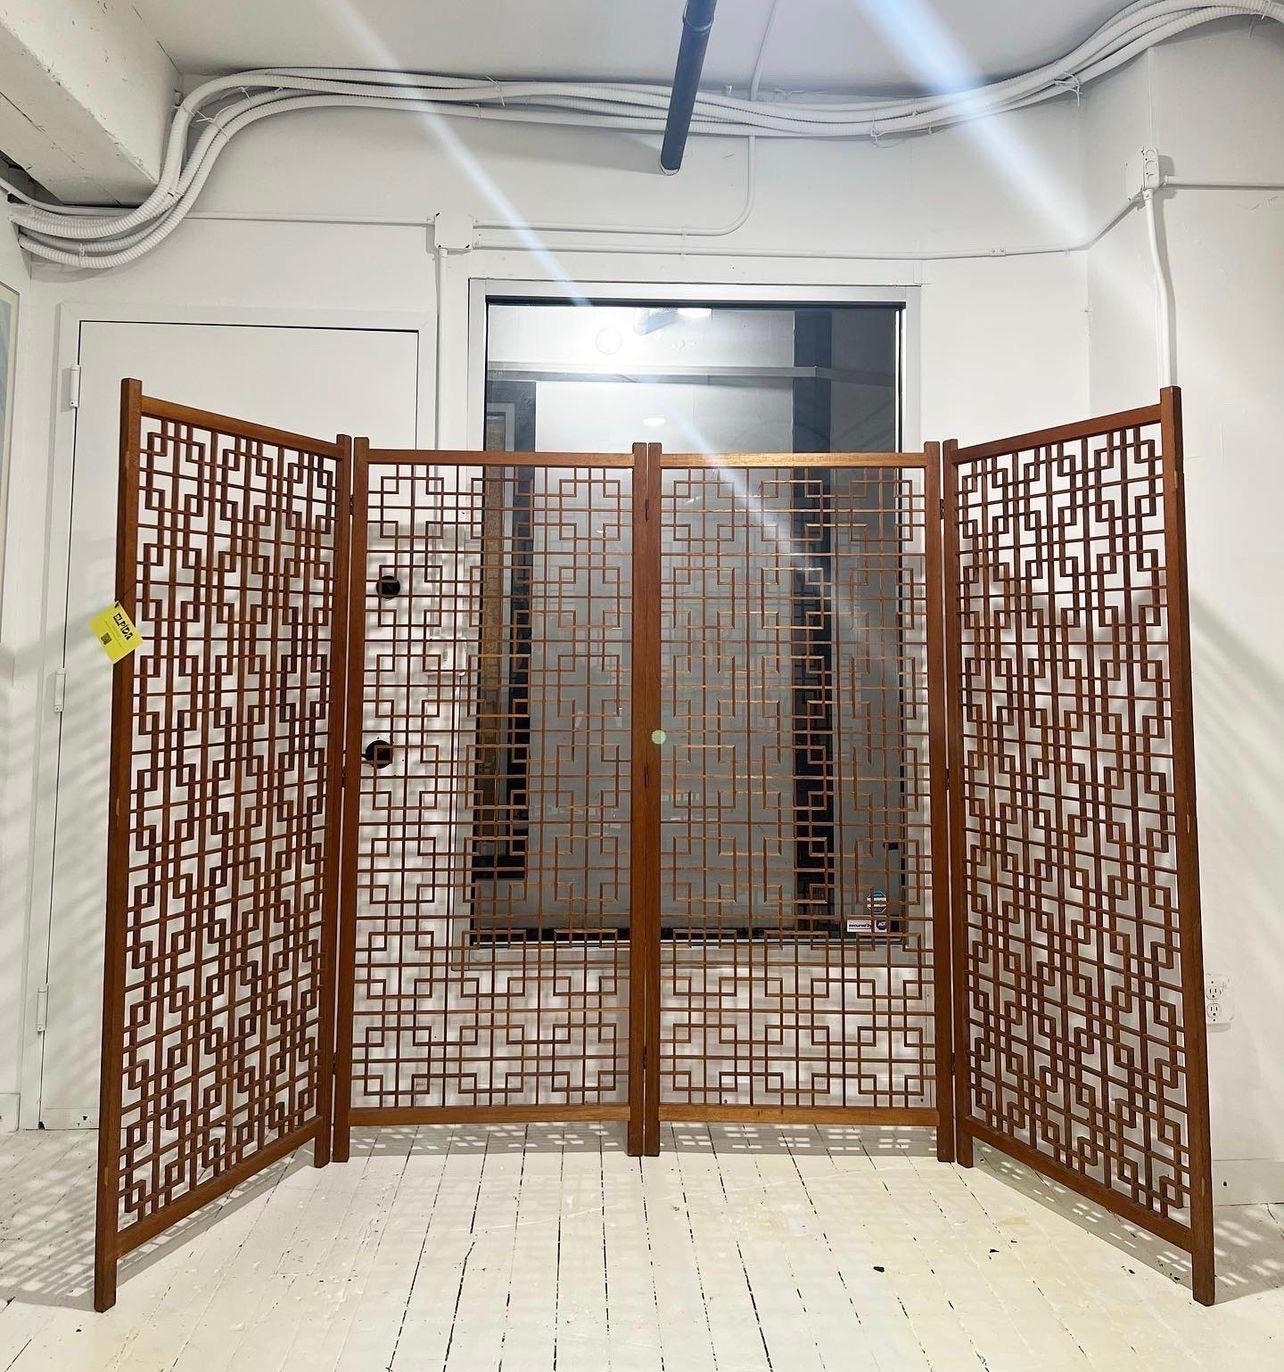 Stunning large scale midcentury teak folding room divider

Features a gorgeous square lattice design. In excellent condition! 

Height 71”
Width of each panel 30”.